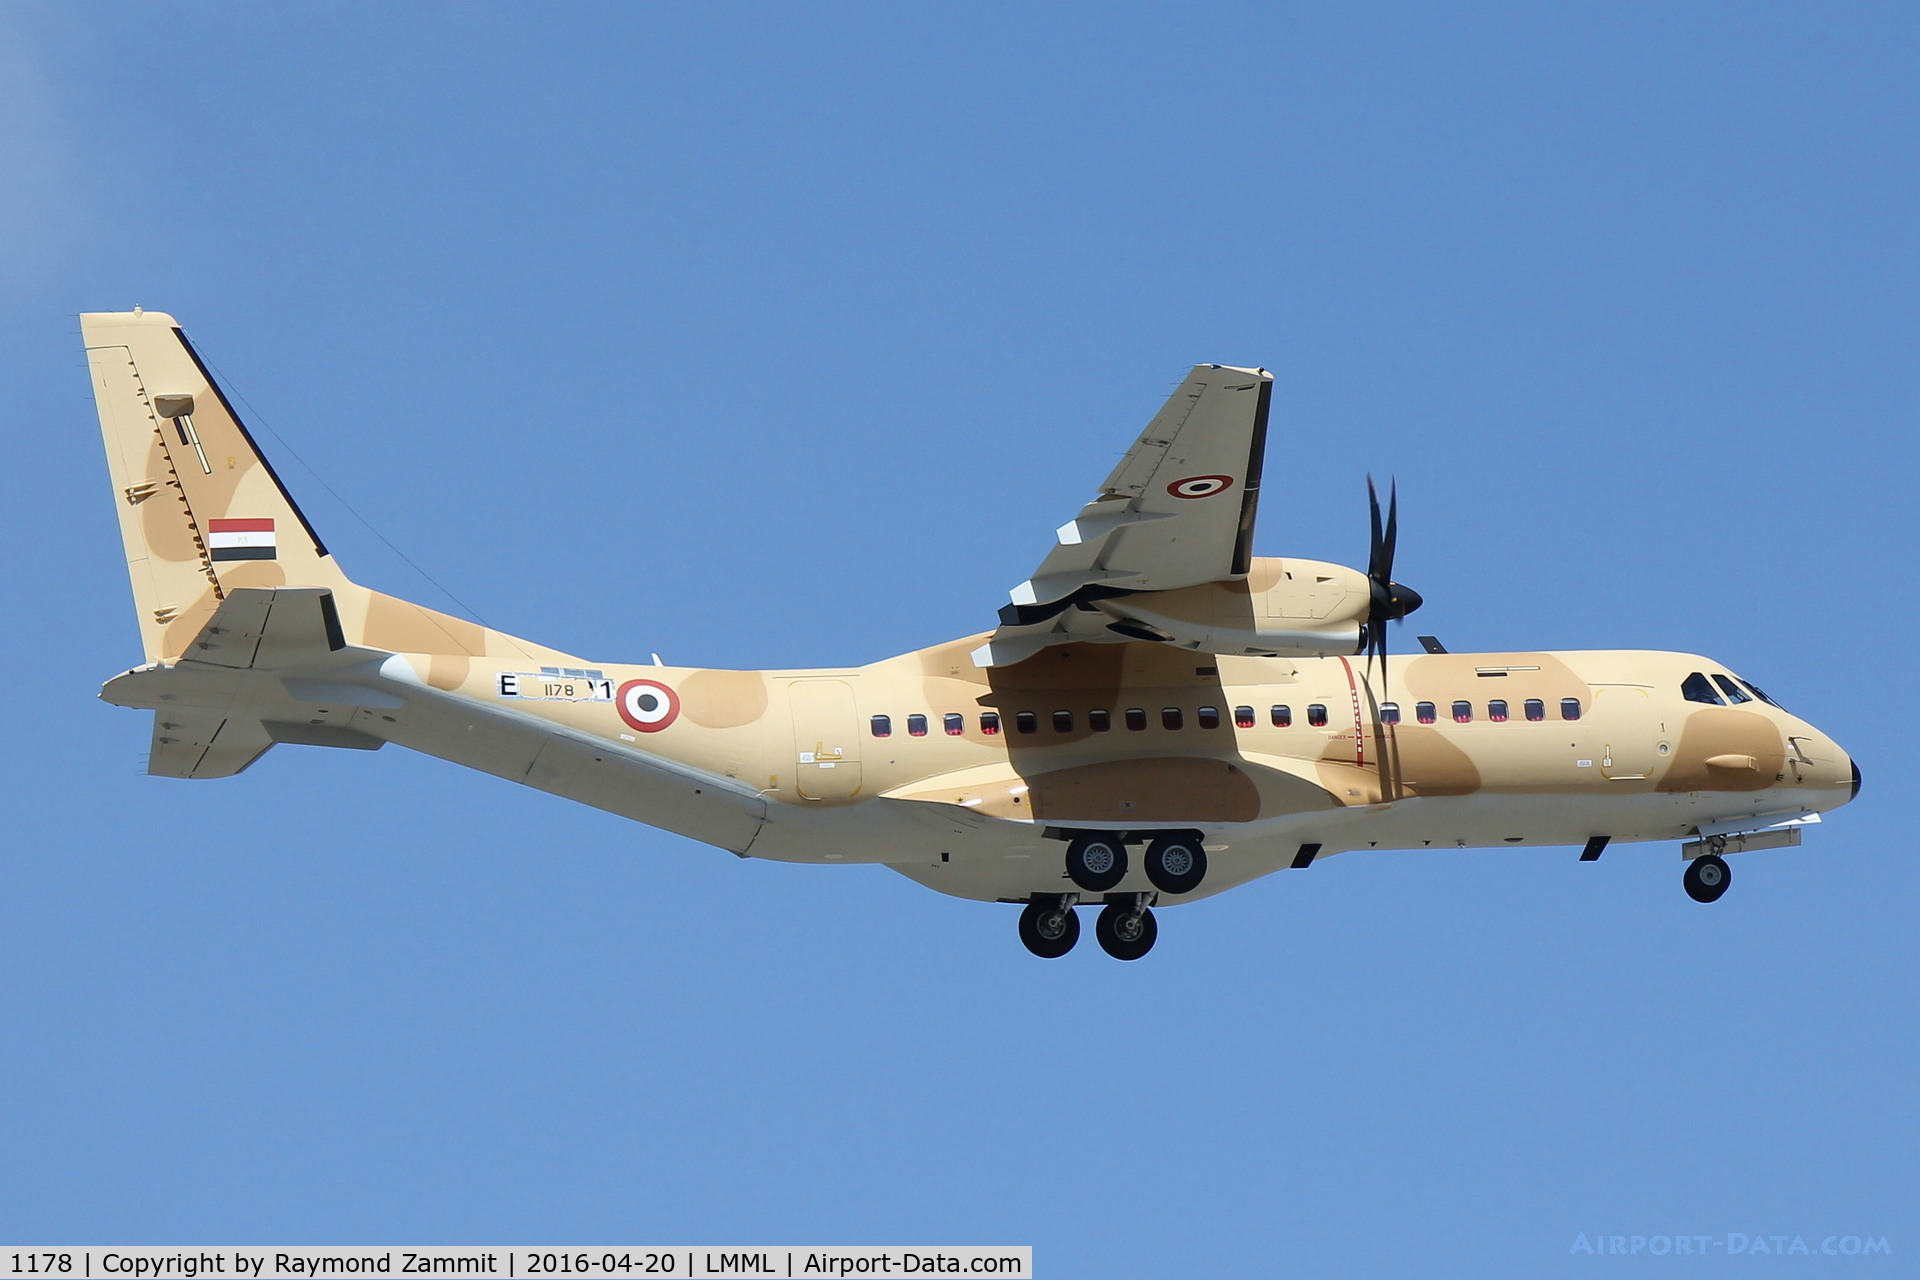 1178, 2015 CASA C-295M C/N S-147, CASA C-295M 1178 Eygptian Air Force landing in Malta whilst being delivered.